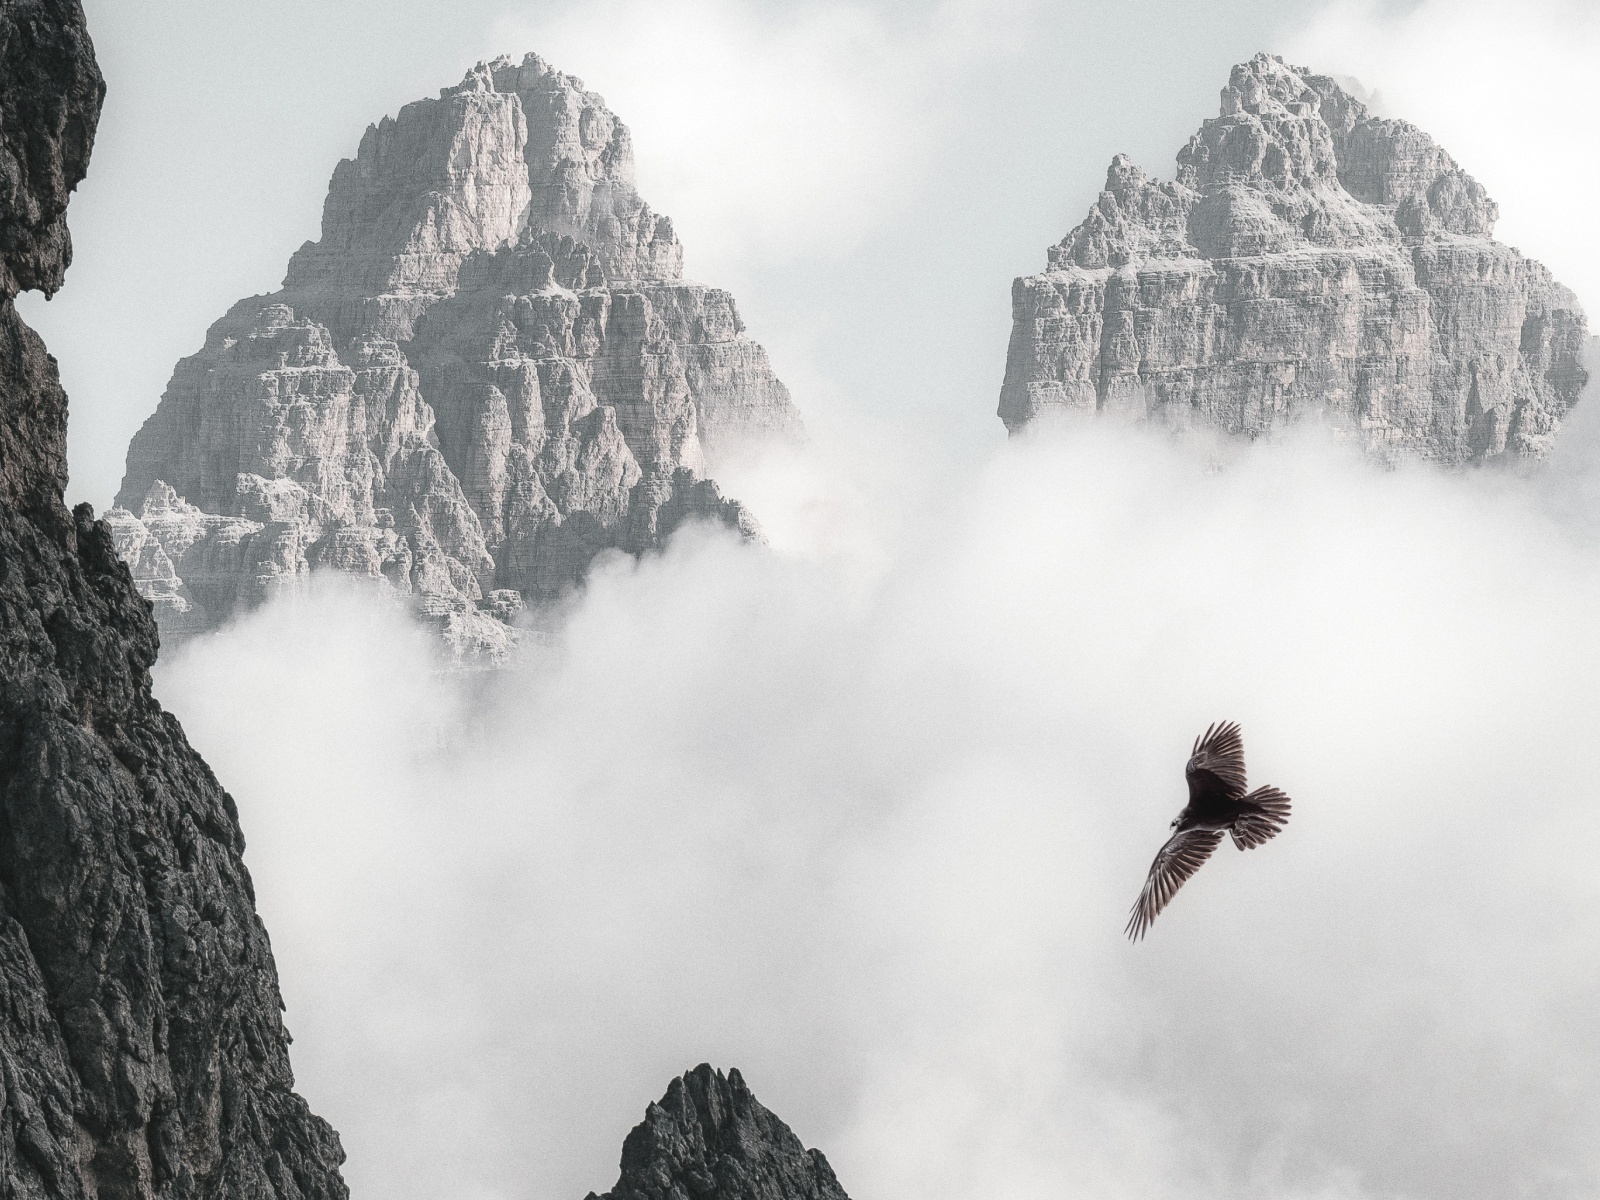 Bald Eagle Flying Through Clouds And Mountains 4k (click to view) HD Wallpapers in 1600x1200 Resolution